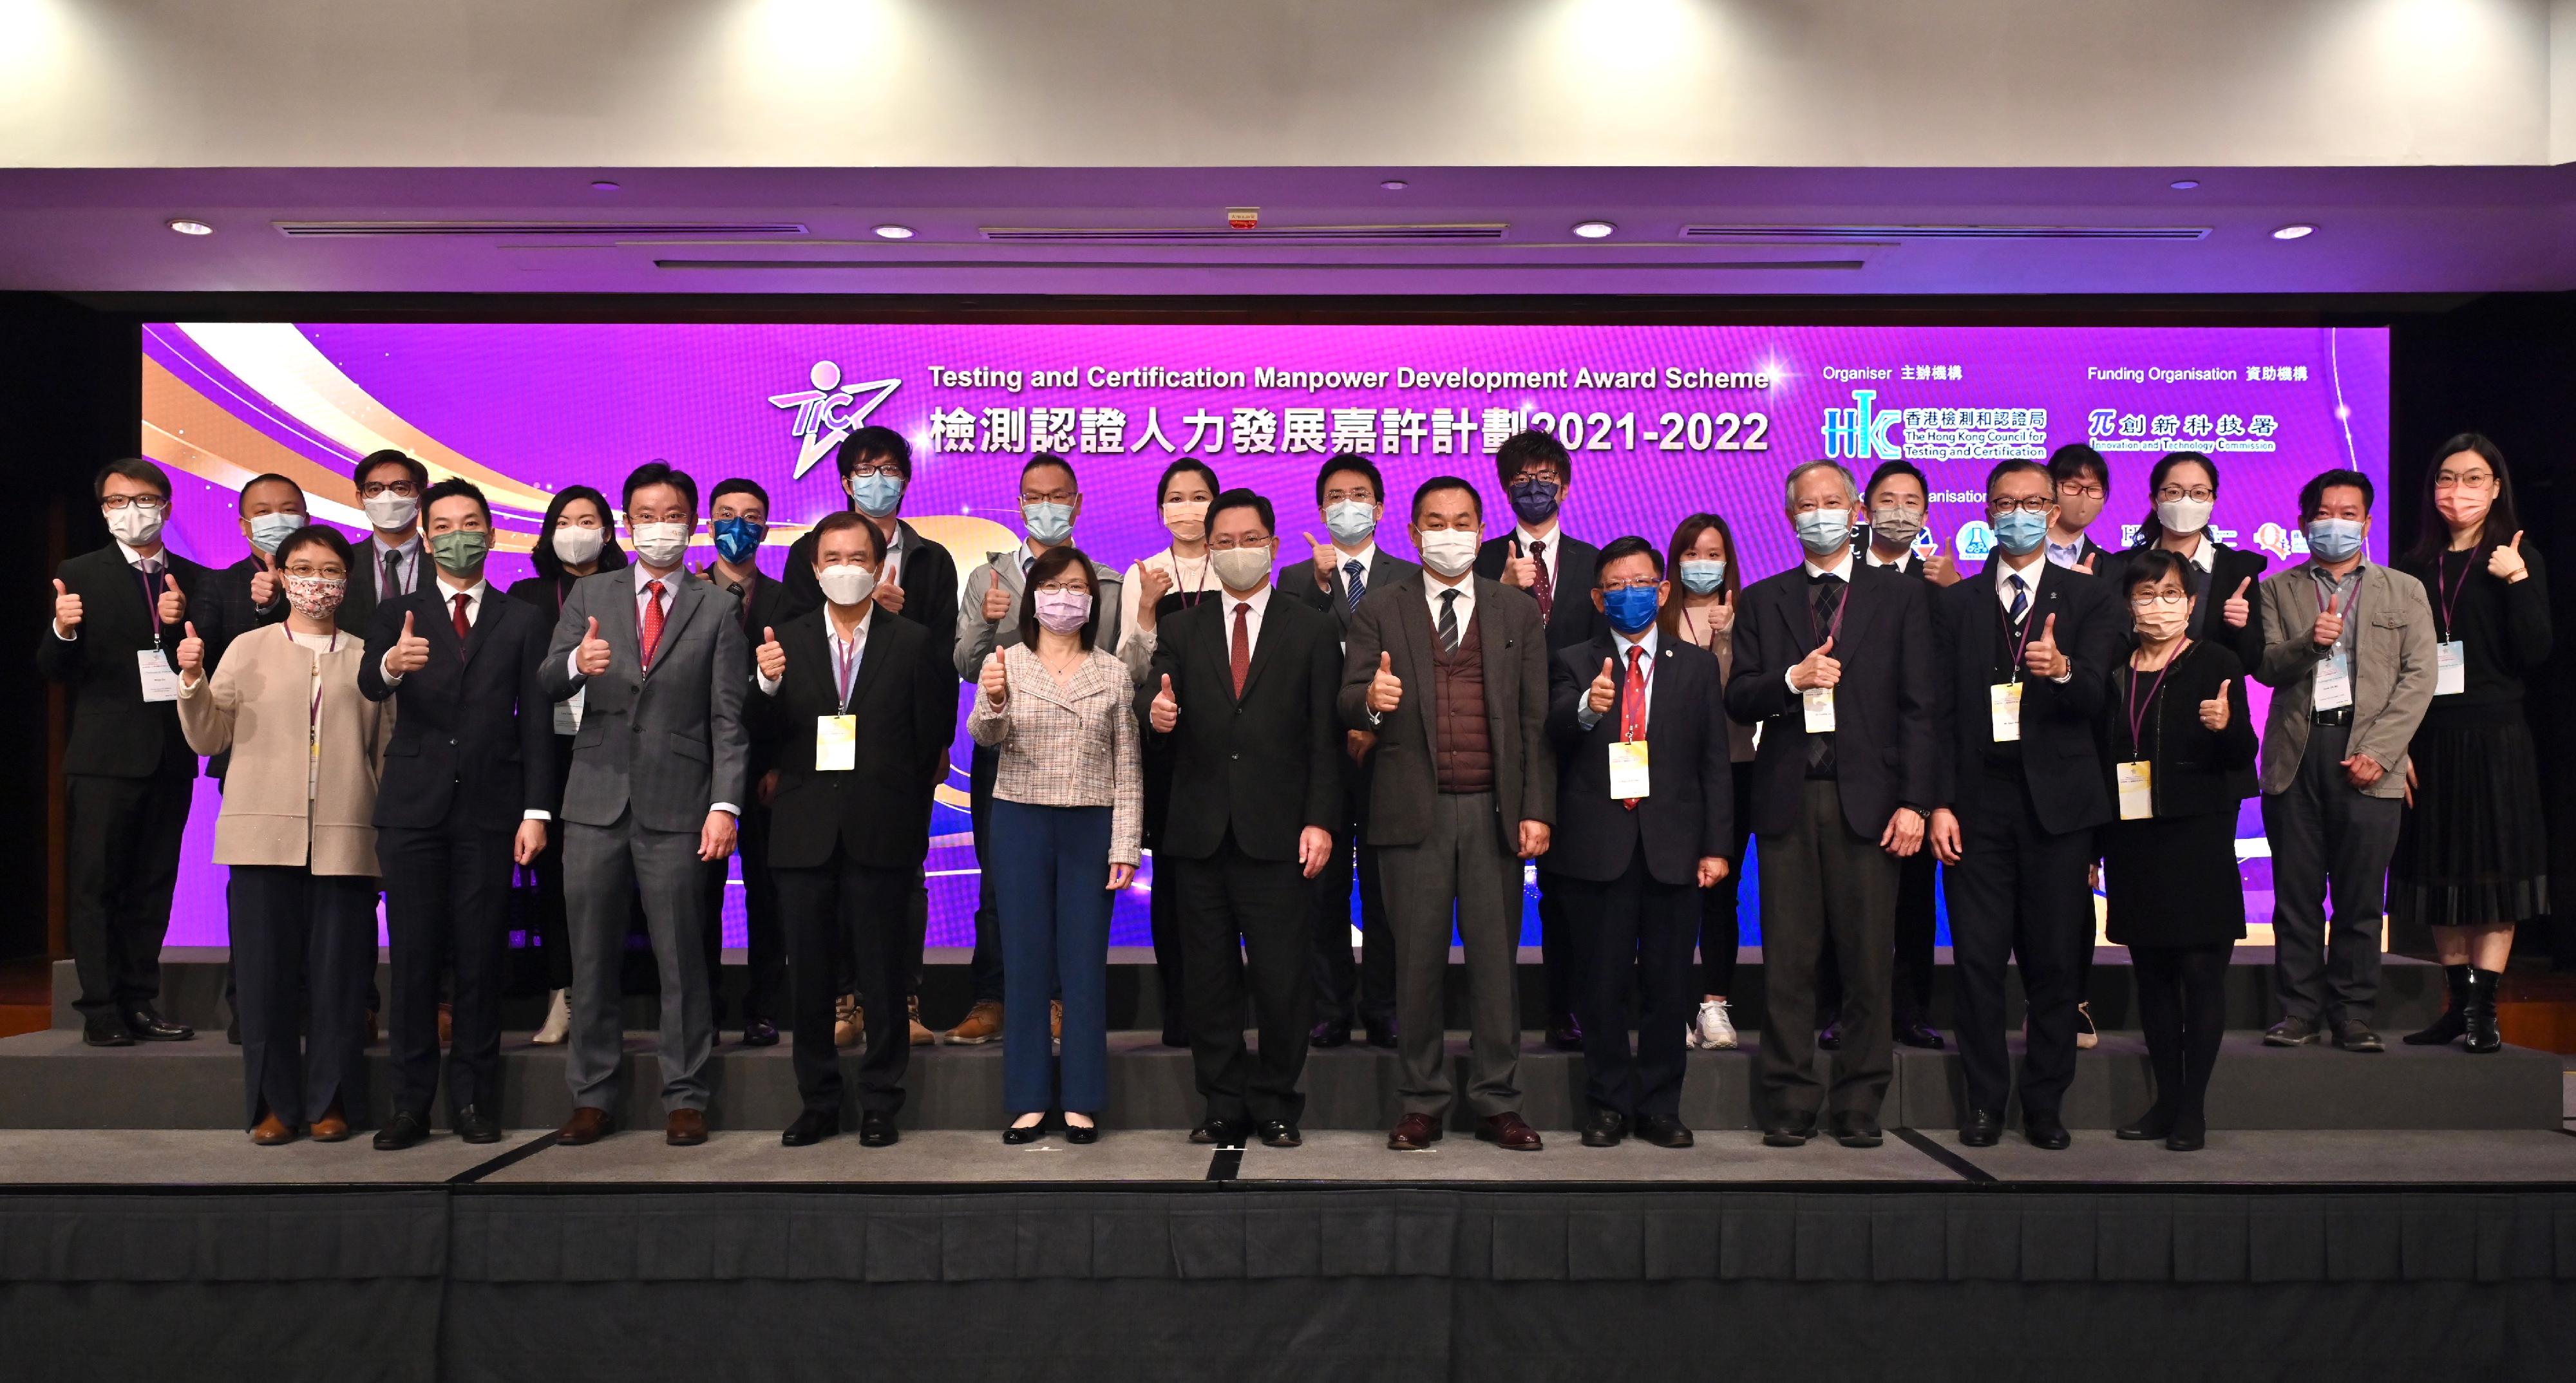 The Secretary for Innovation and Technology, Mr Alfred Sit (first row, centre); the Commissioner for Innovation and Technology, Ms Rebecca Pun (first row, fifth left); the Chairman of the Hong Kong Council for Testing and Certification, Professor Albert Yu (first row, fifth right); and the Assessment Panel Chairmen and Members are pictured with the Professional Awardees at the award presentation ceremony of the Testing and Certification Manpower Development Award Scheme today (December 22).